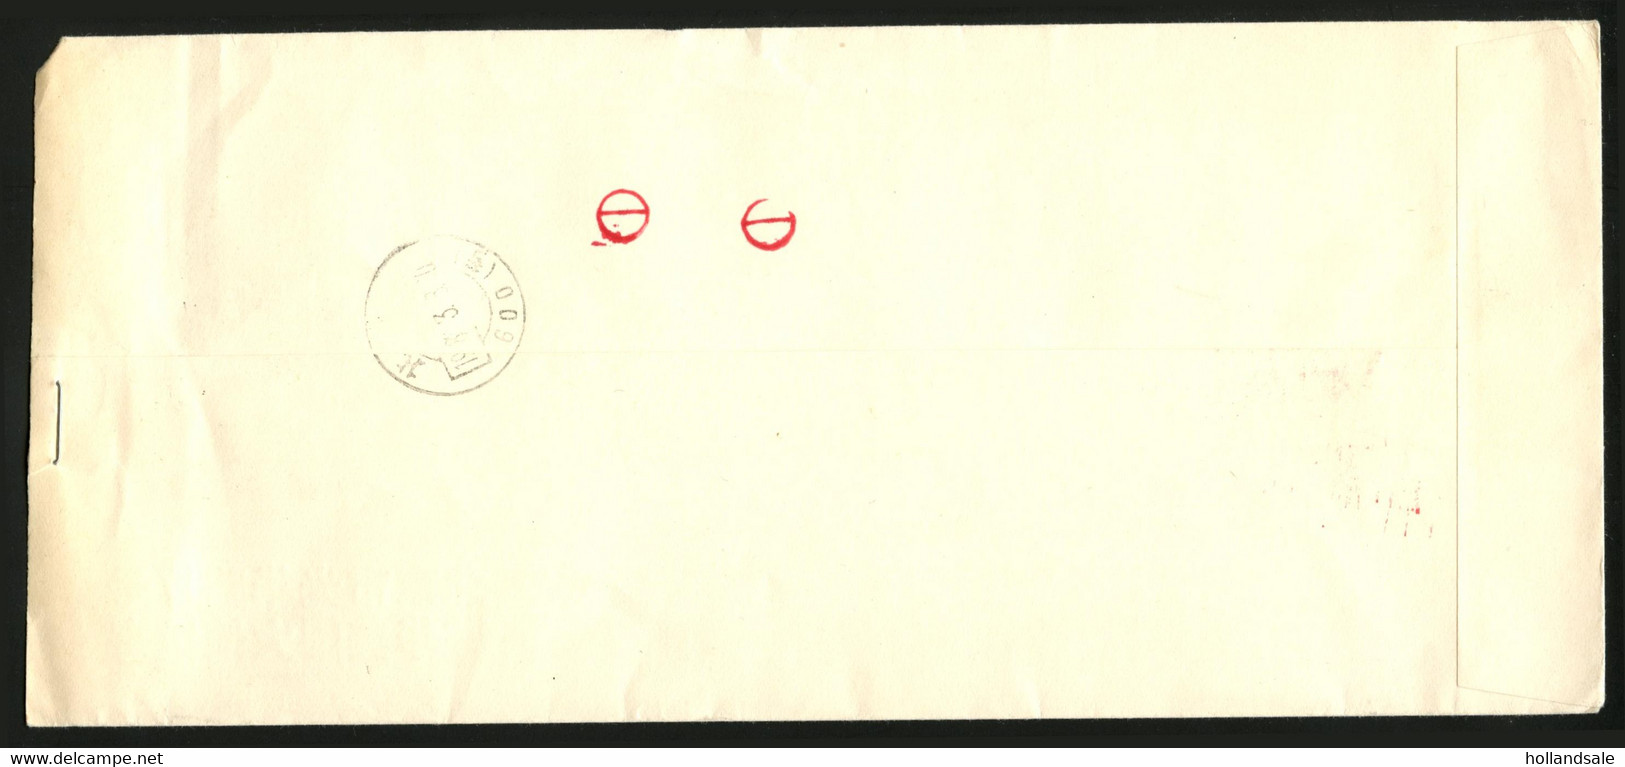 CHINA PRC - Lot of 7 covers with Octagonal Postage Paid cancellations..